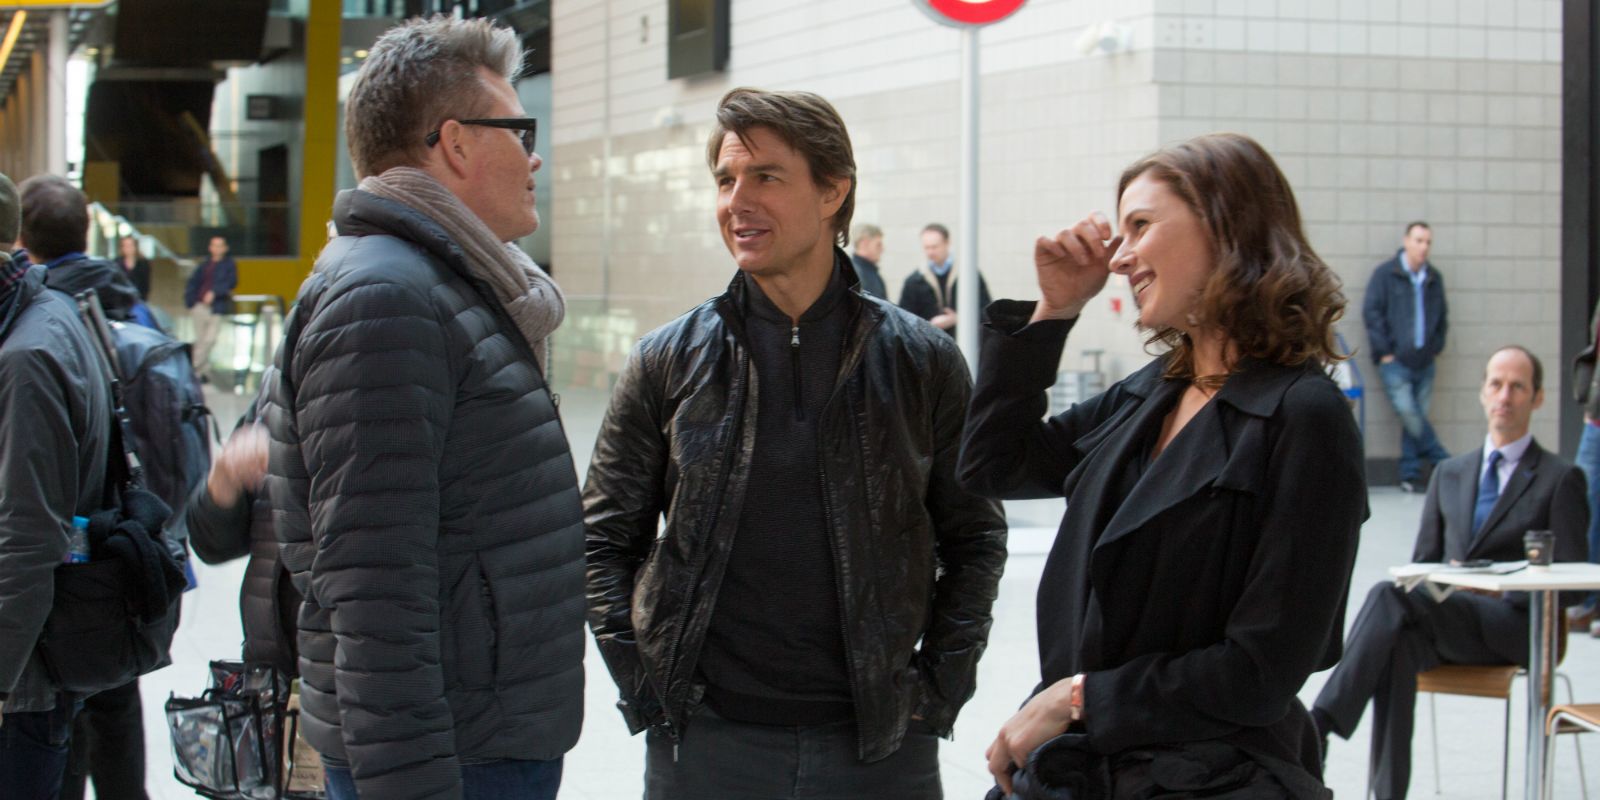 Mission: Impossible - Rogue Nation - Christopher McQuarrie, Tom Cruise and Rebecca Ferguson